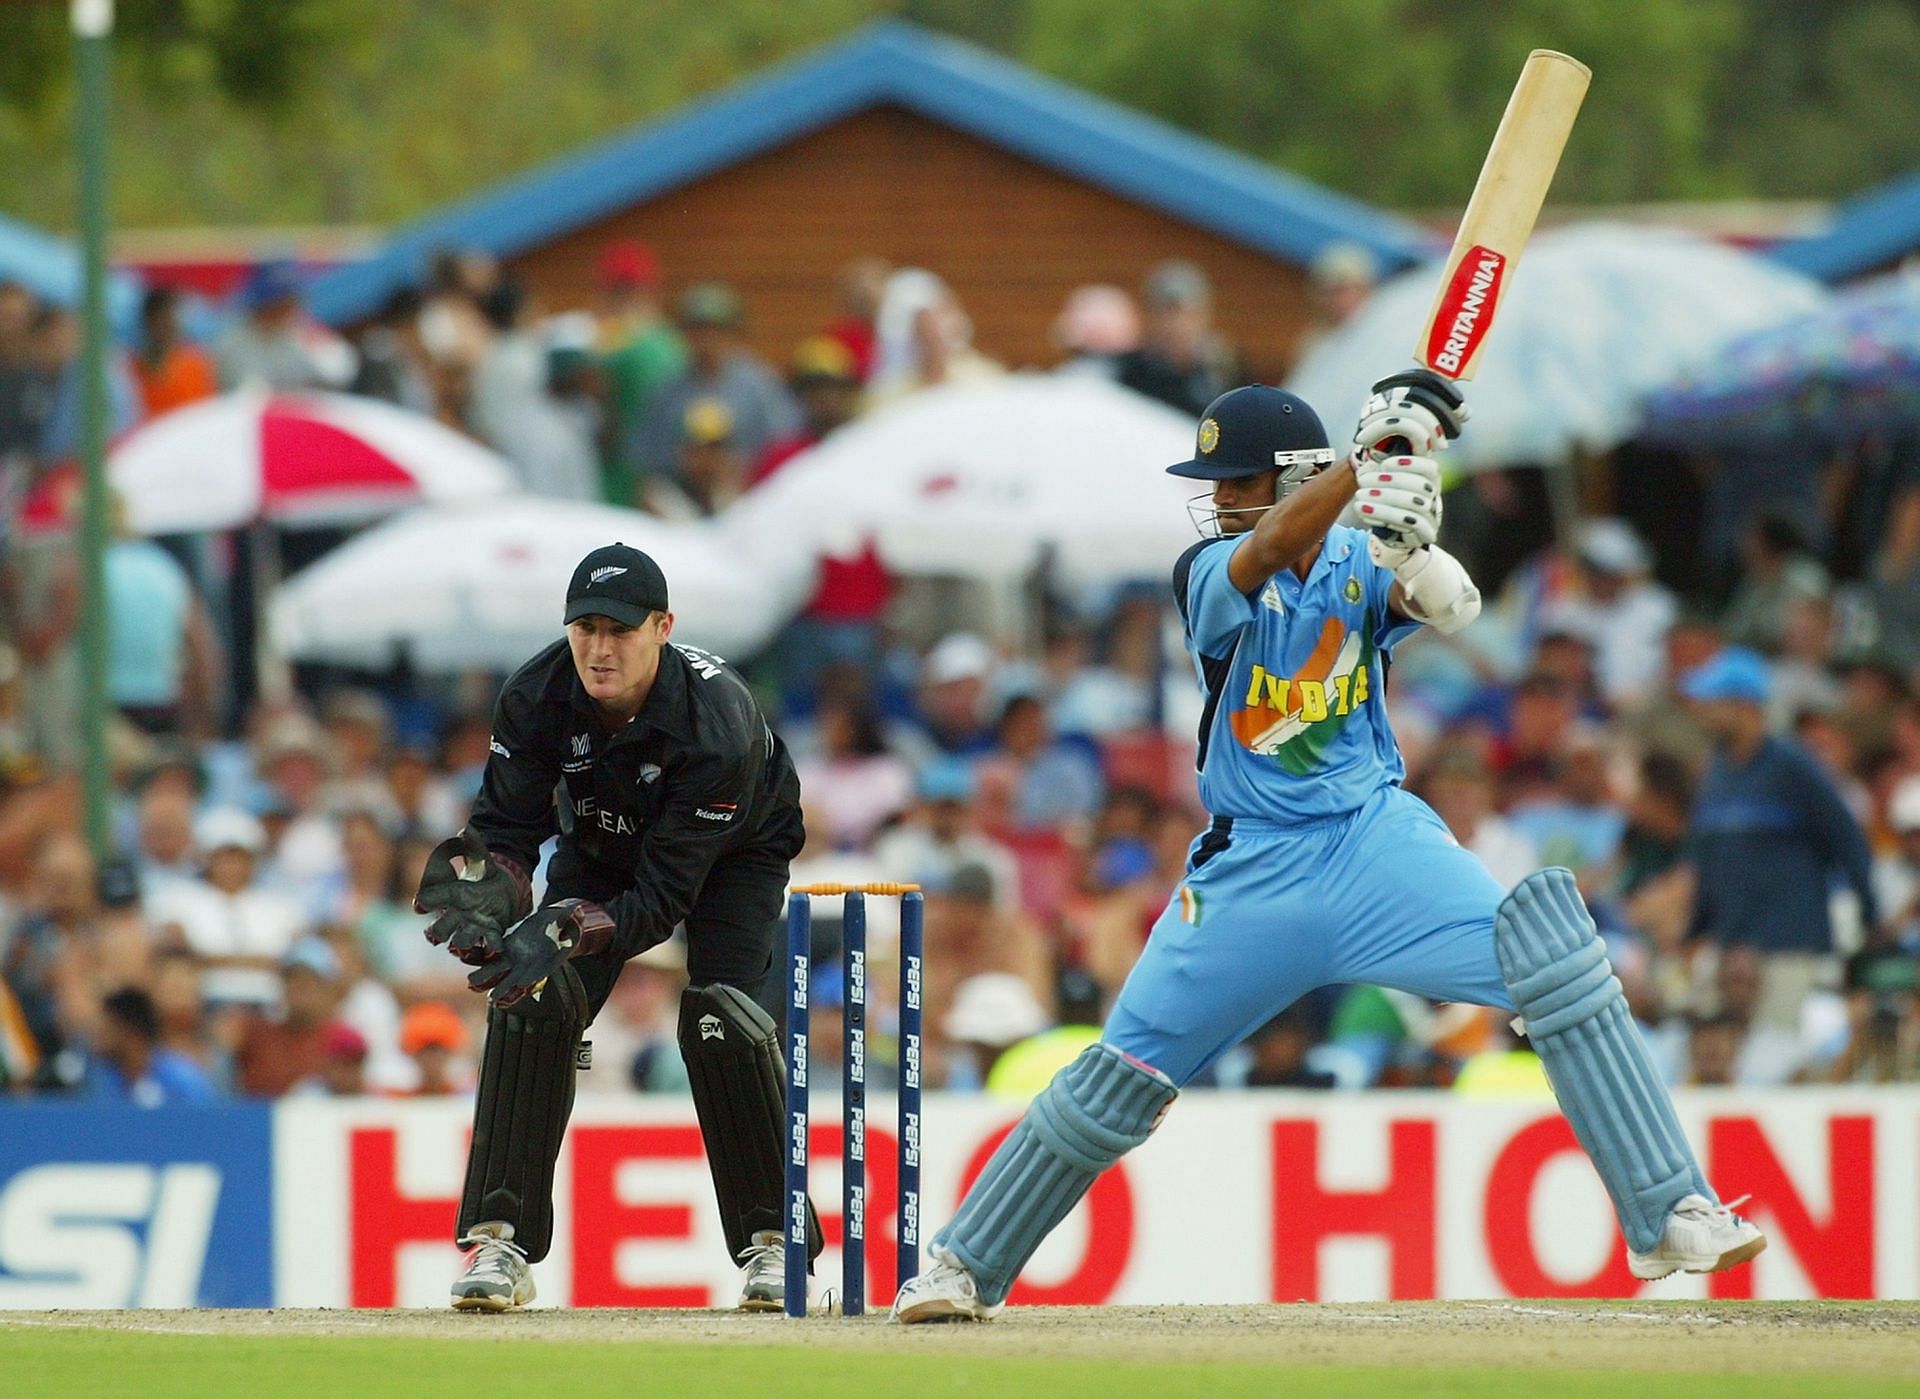 Rahul Dravid of India in action